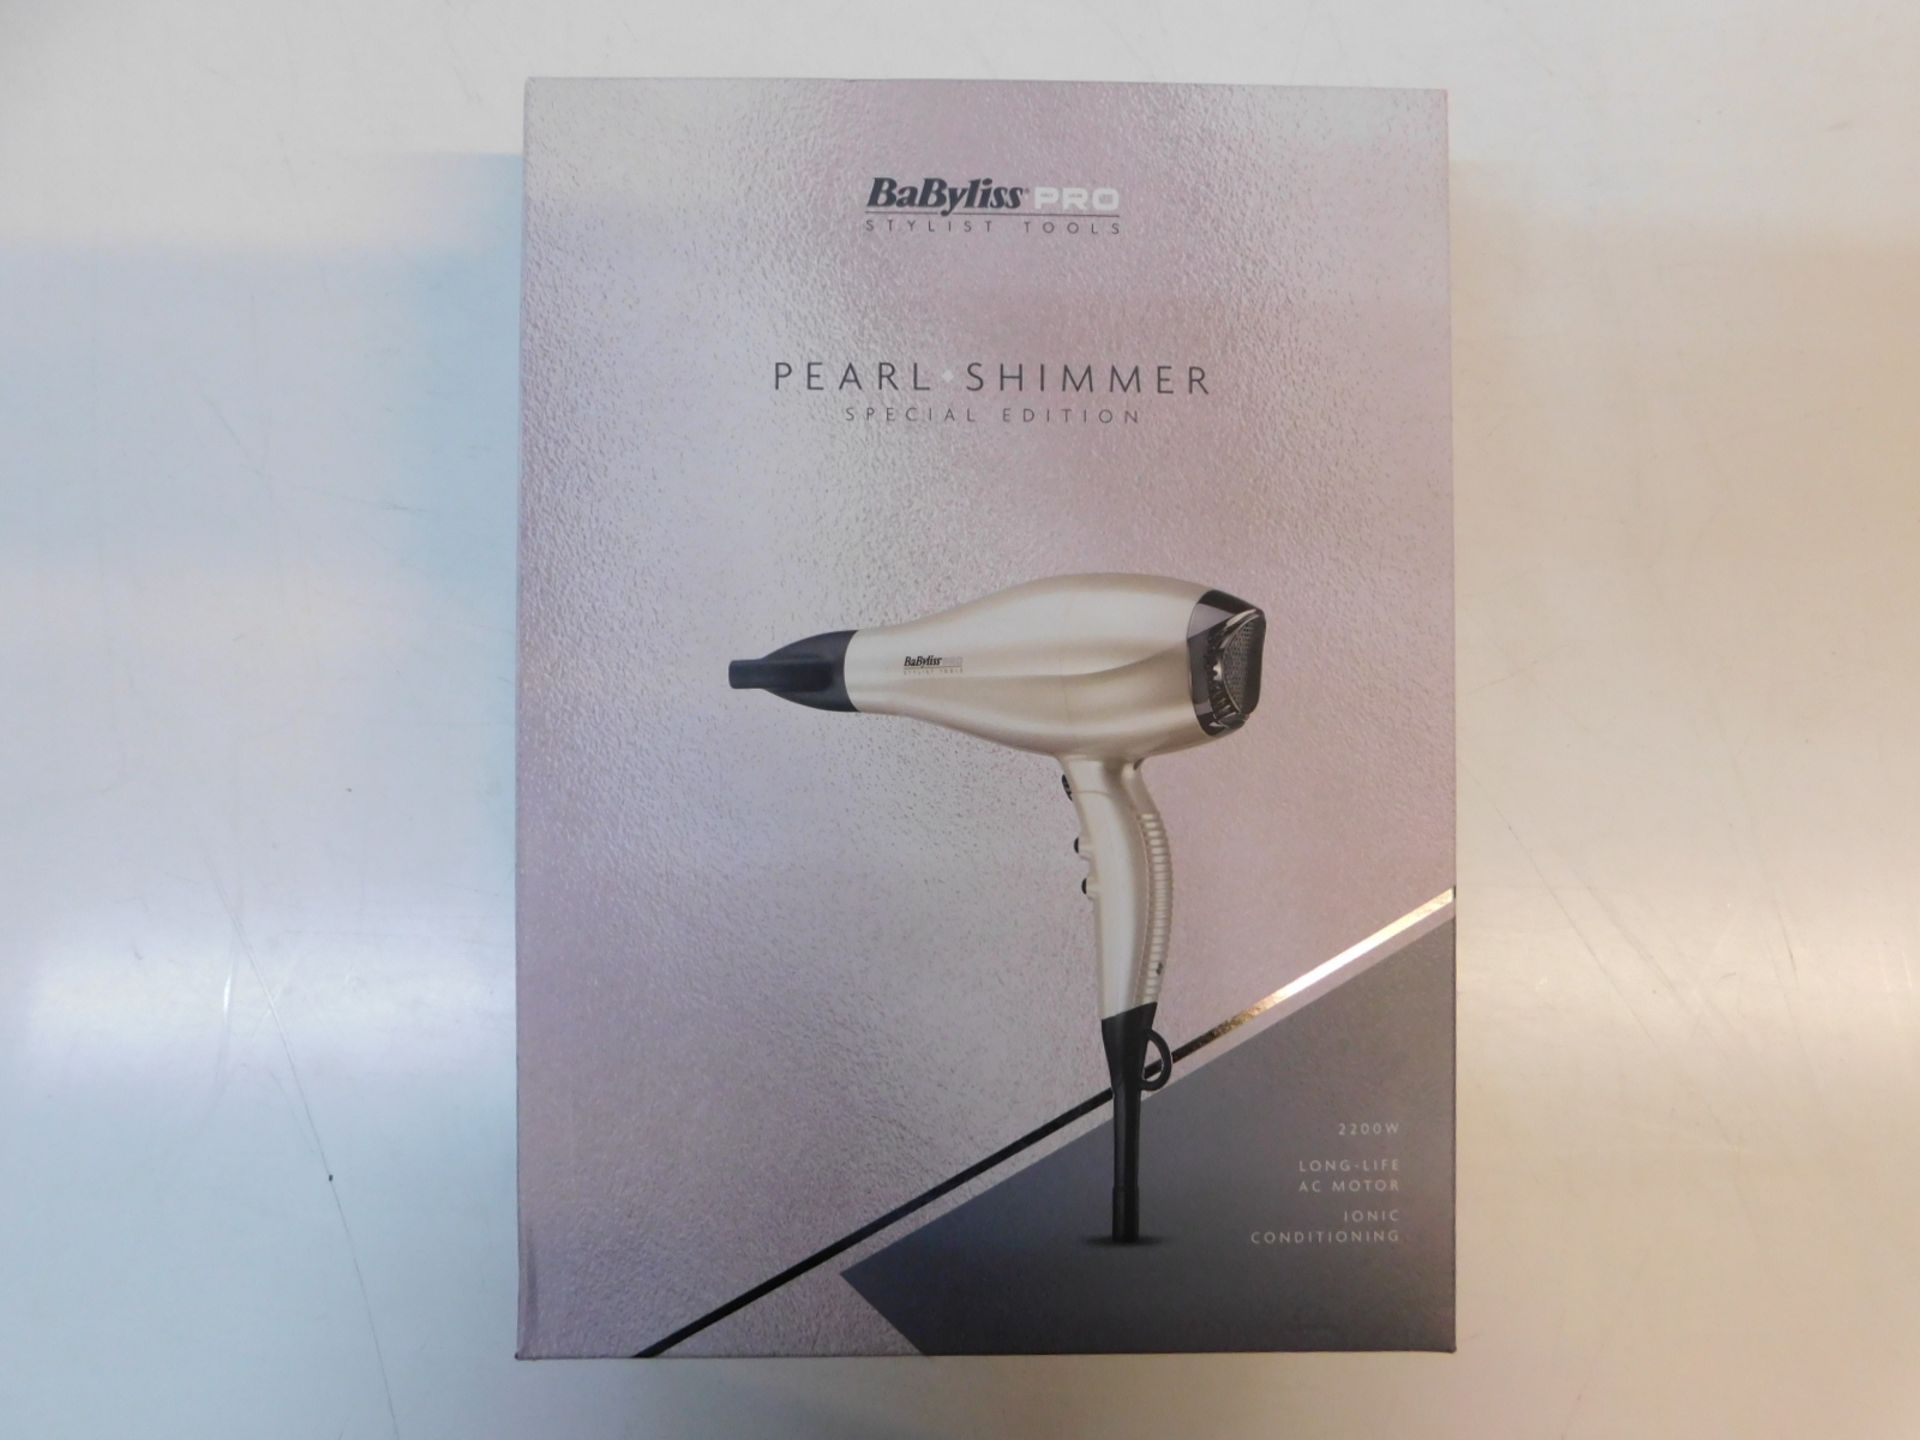 1 BOXED BABYLISS PRO PEARL SHIMMER 2200W SPECIAL EDITION DRYER RRP Â£52.99